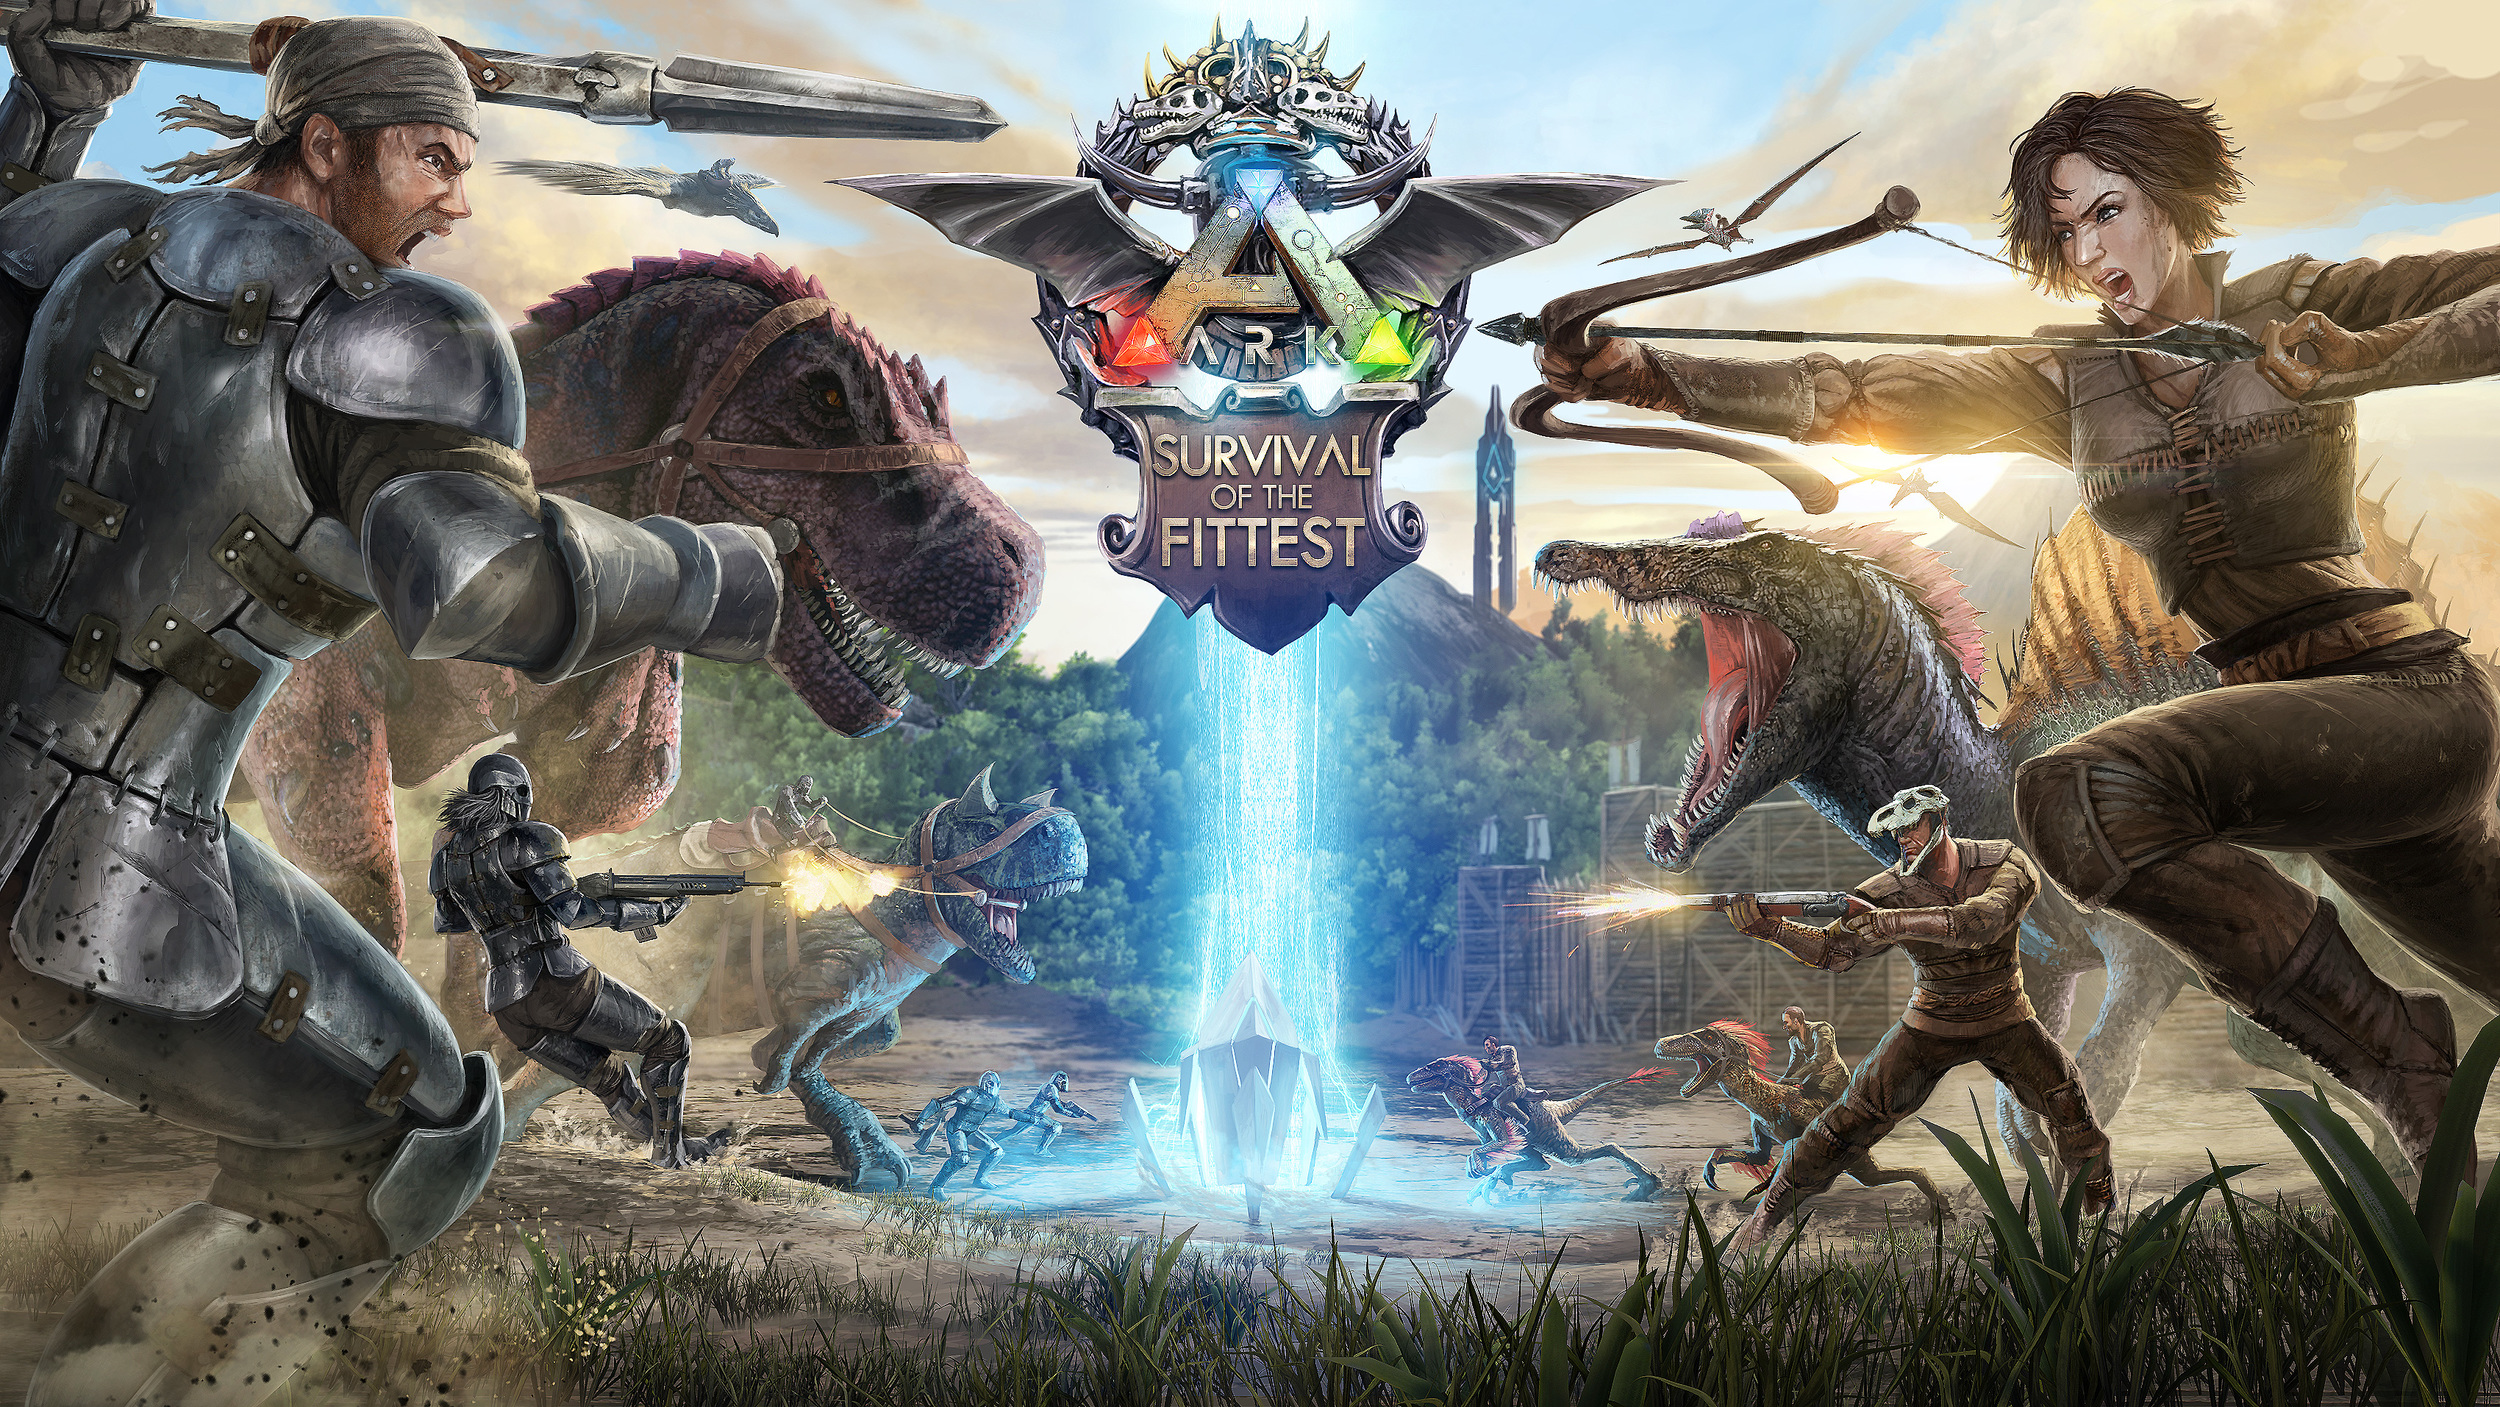 ARK: Survival of the Fittest — Studio Wildcard